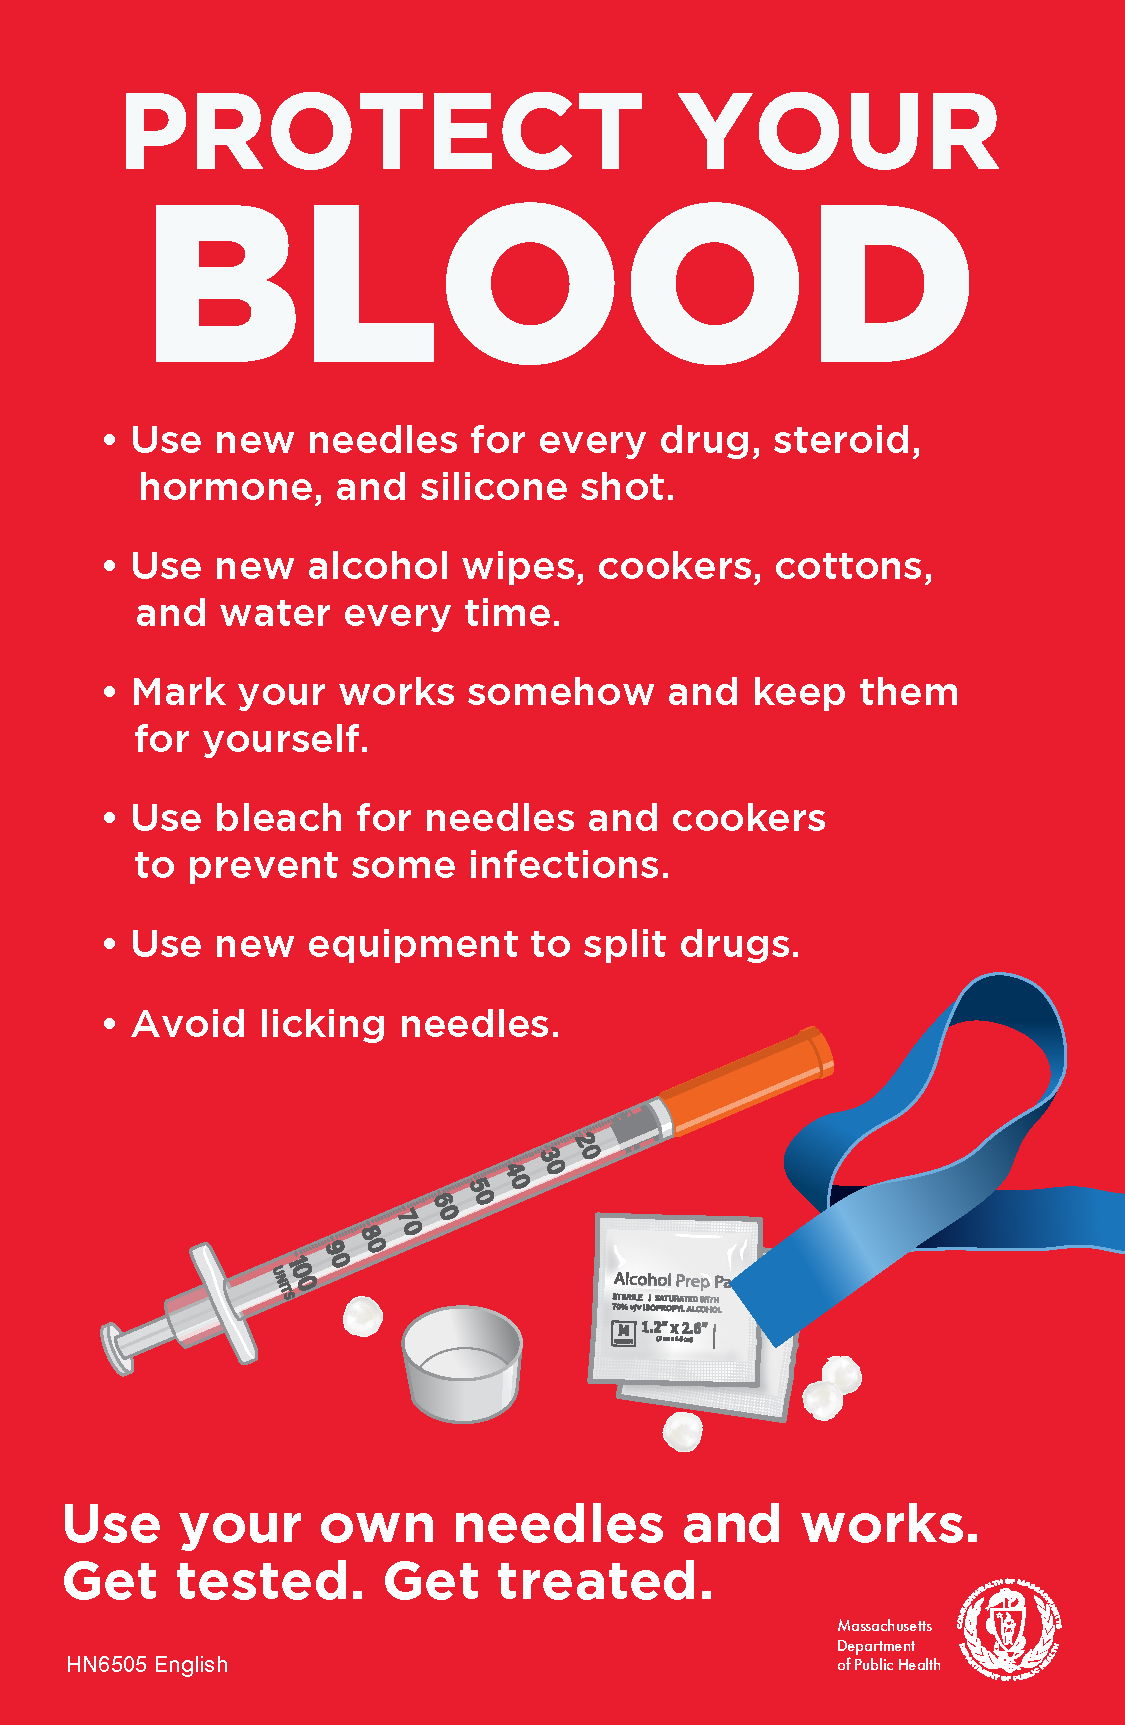 Protect Your Blood Small Poster Massachusetts Health Promotion